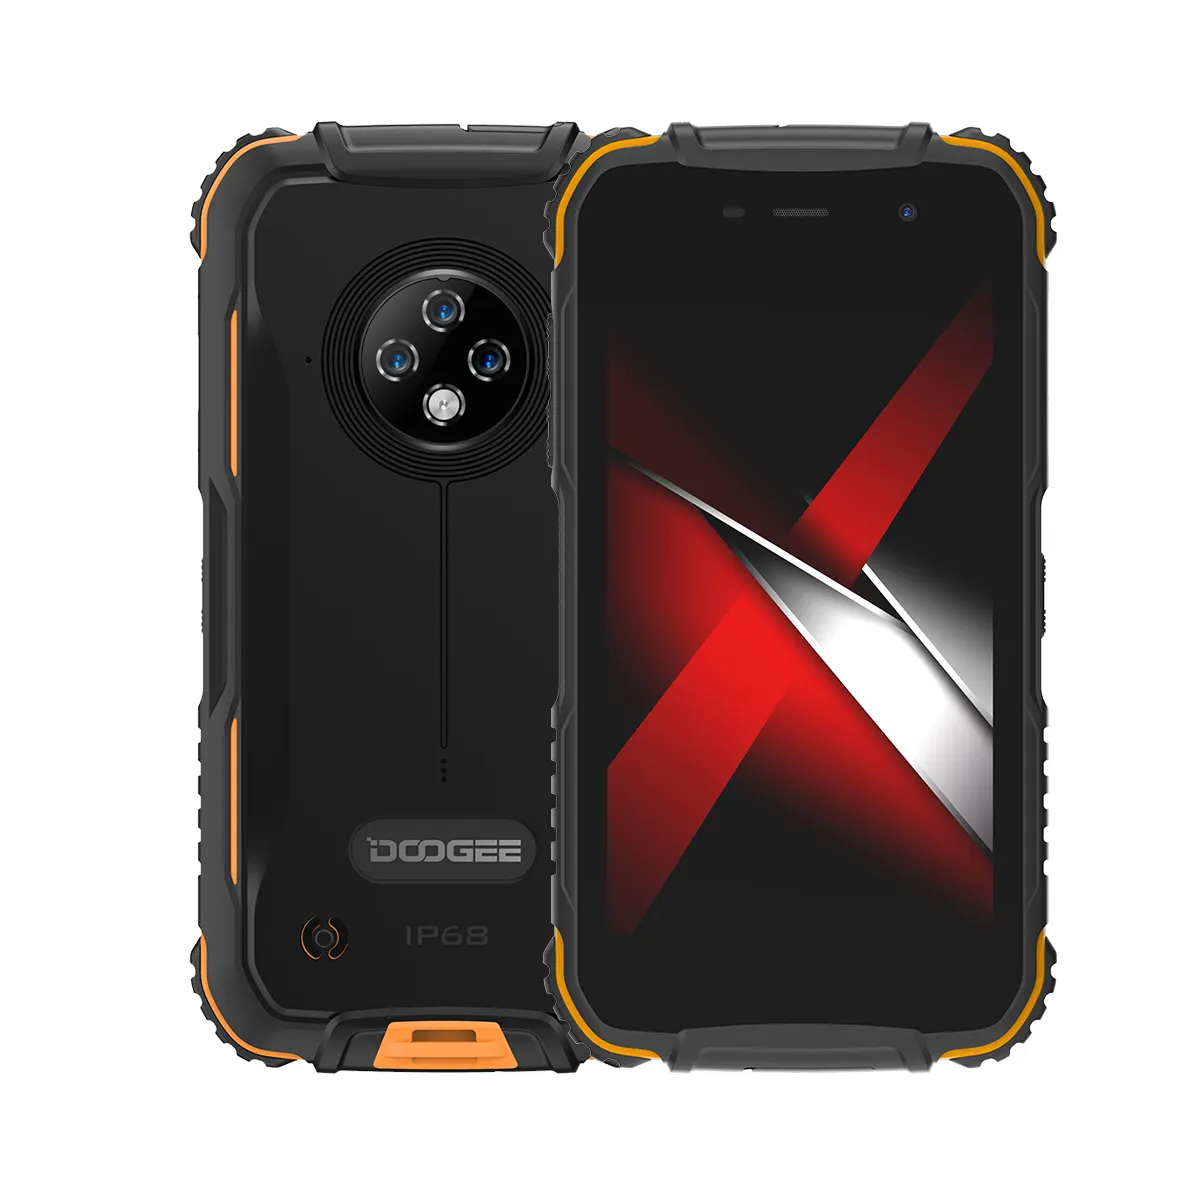 New model DOOGEE S35 cheap Rugged mobile Phone, 5.0 inch Android 10 Celular Face ID OTG Mo20 Dual SIM 13mp camera 3G+16GB phone